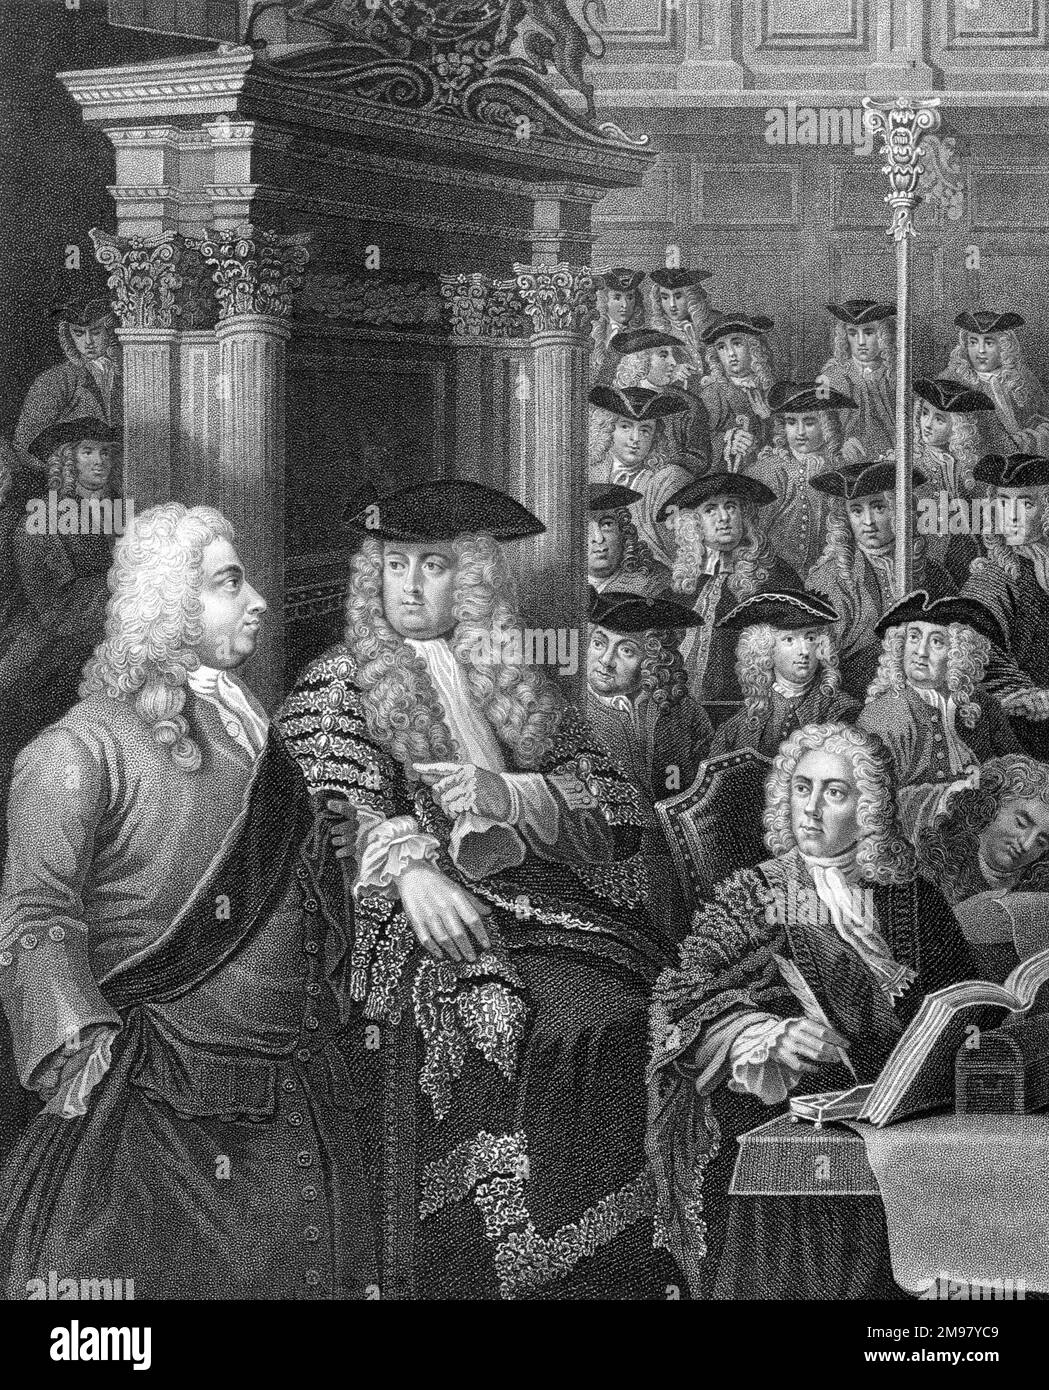 The House of Commons in Walpole's Administration - with Arthur Onslow in the Speaker's Chair and Sir Robert Walpole on the left. Others present include Sidney Godolphin, Sir Joseph Jekyll, Edward Stables, Sir James Thornhill (Hogarth's father-in-law), and Mr Aiskew. The Speaker appears to be calling on Walpole to speak. Stock Photo